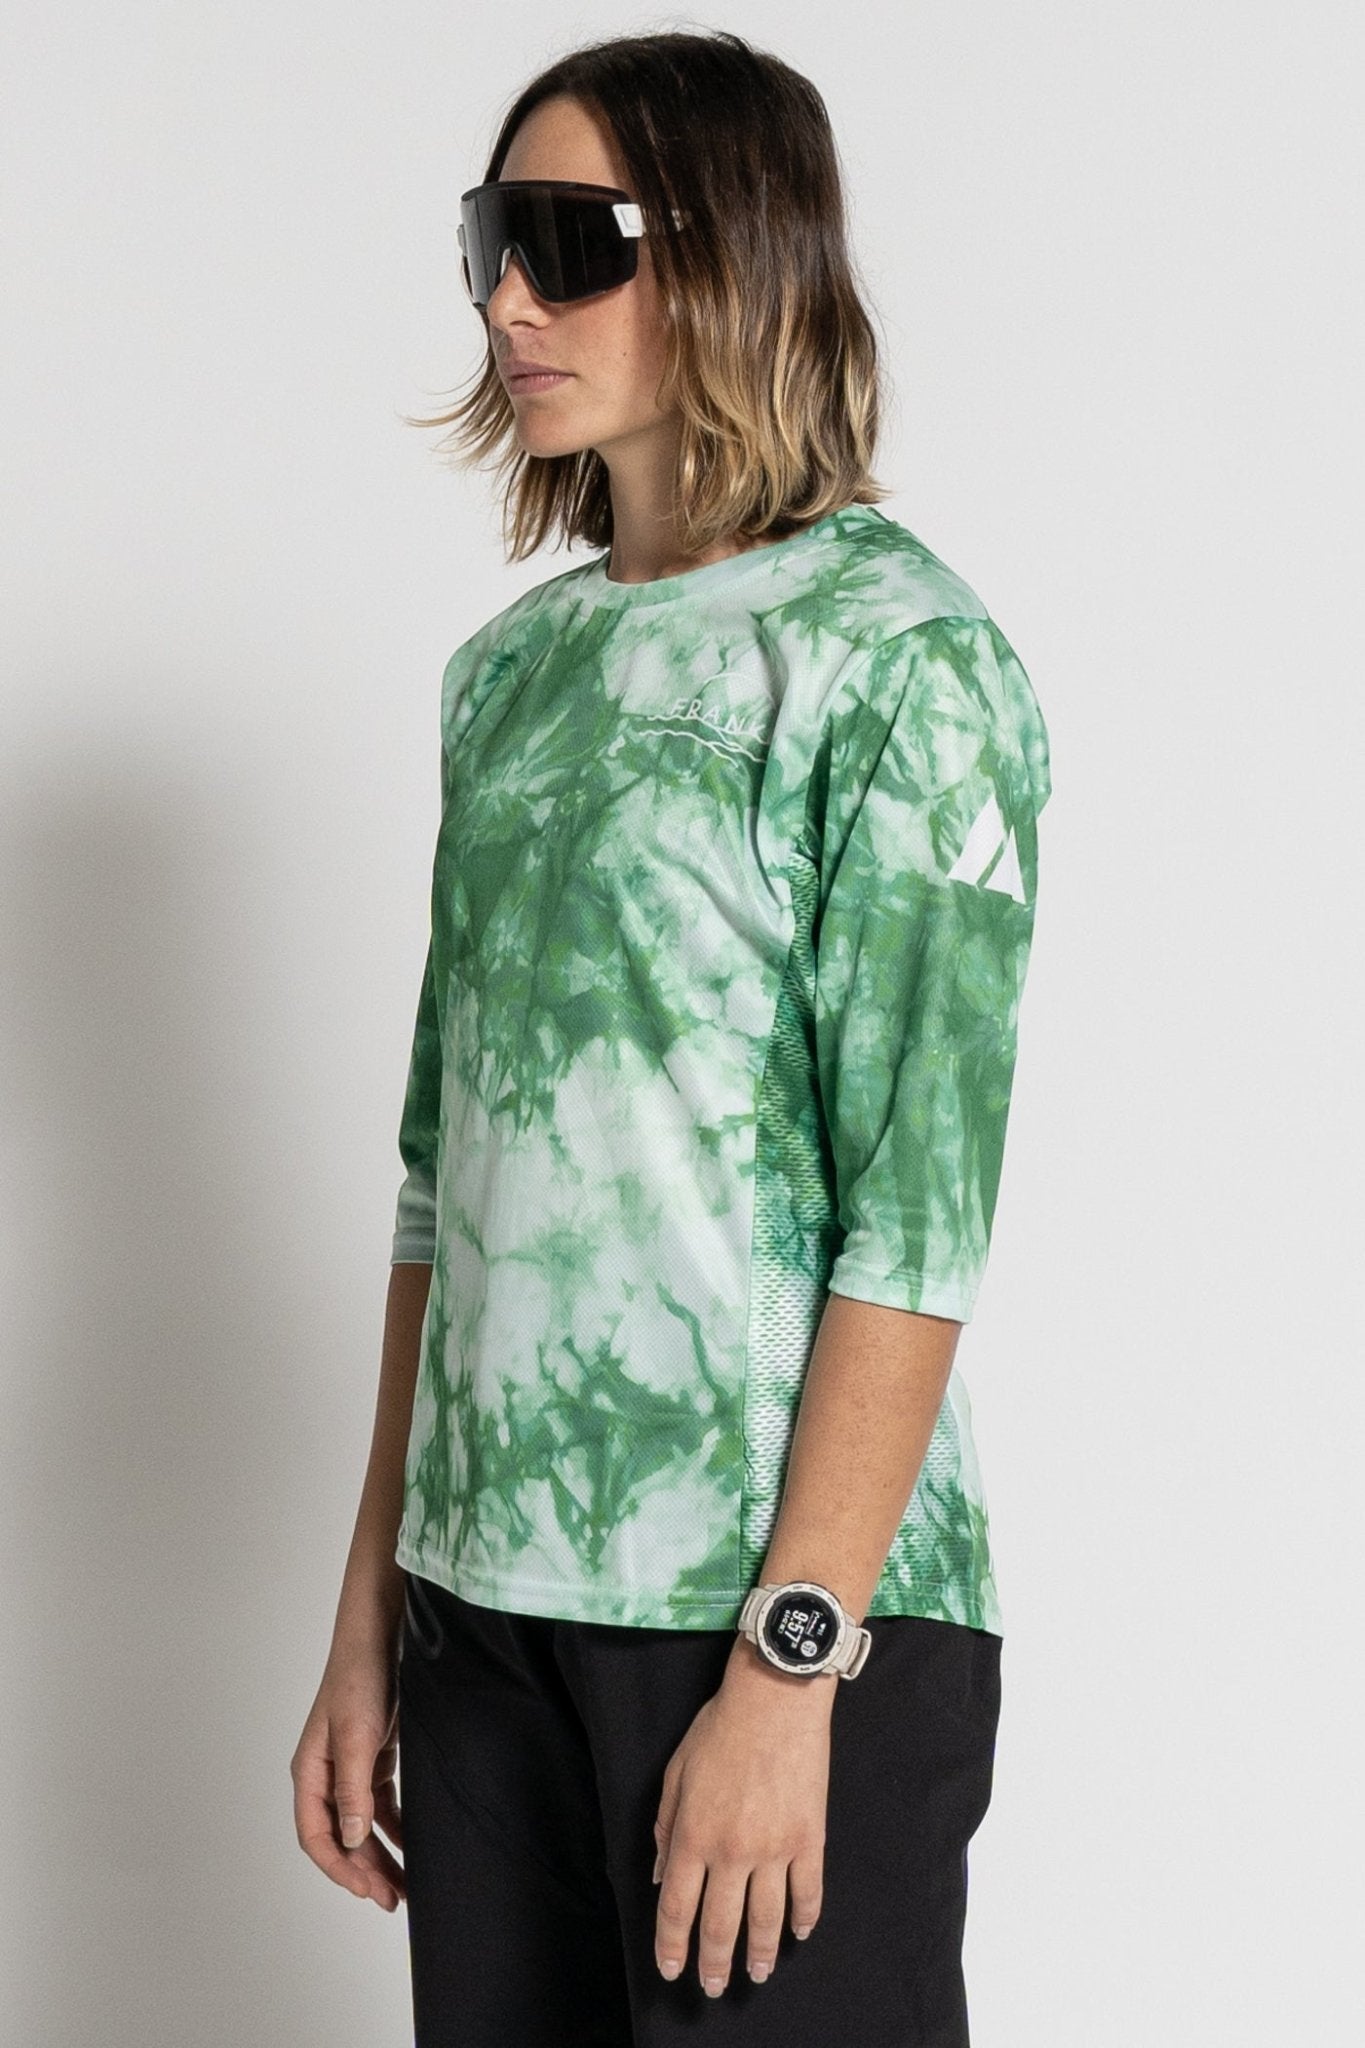 Hipsters Remedy Forest Green Tie Dye T-Shirt - Green - XL